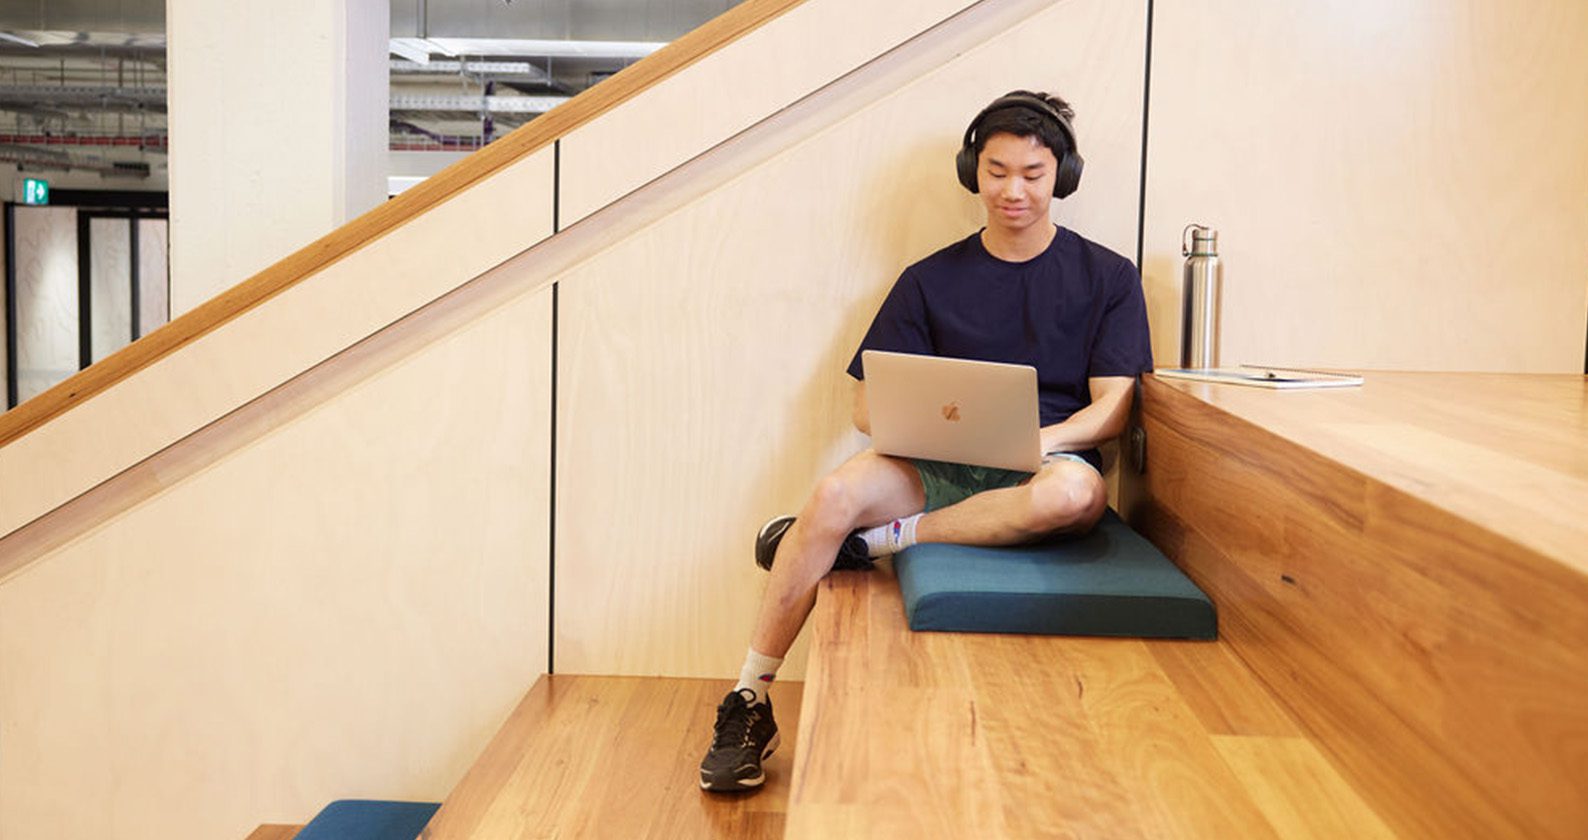 A male student sitting on some wooden steps looking at a laptop while wearing headphones